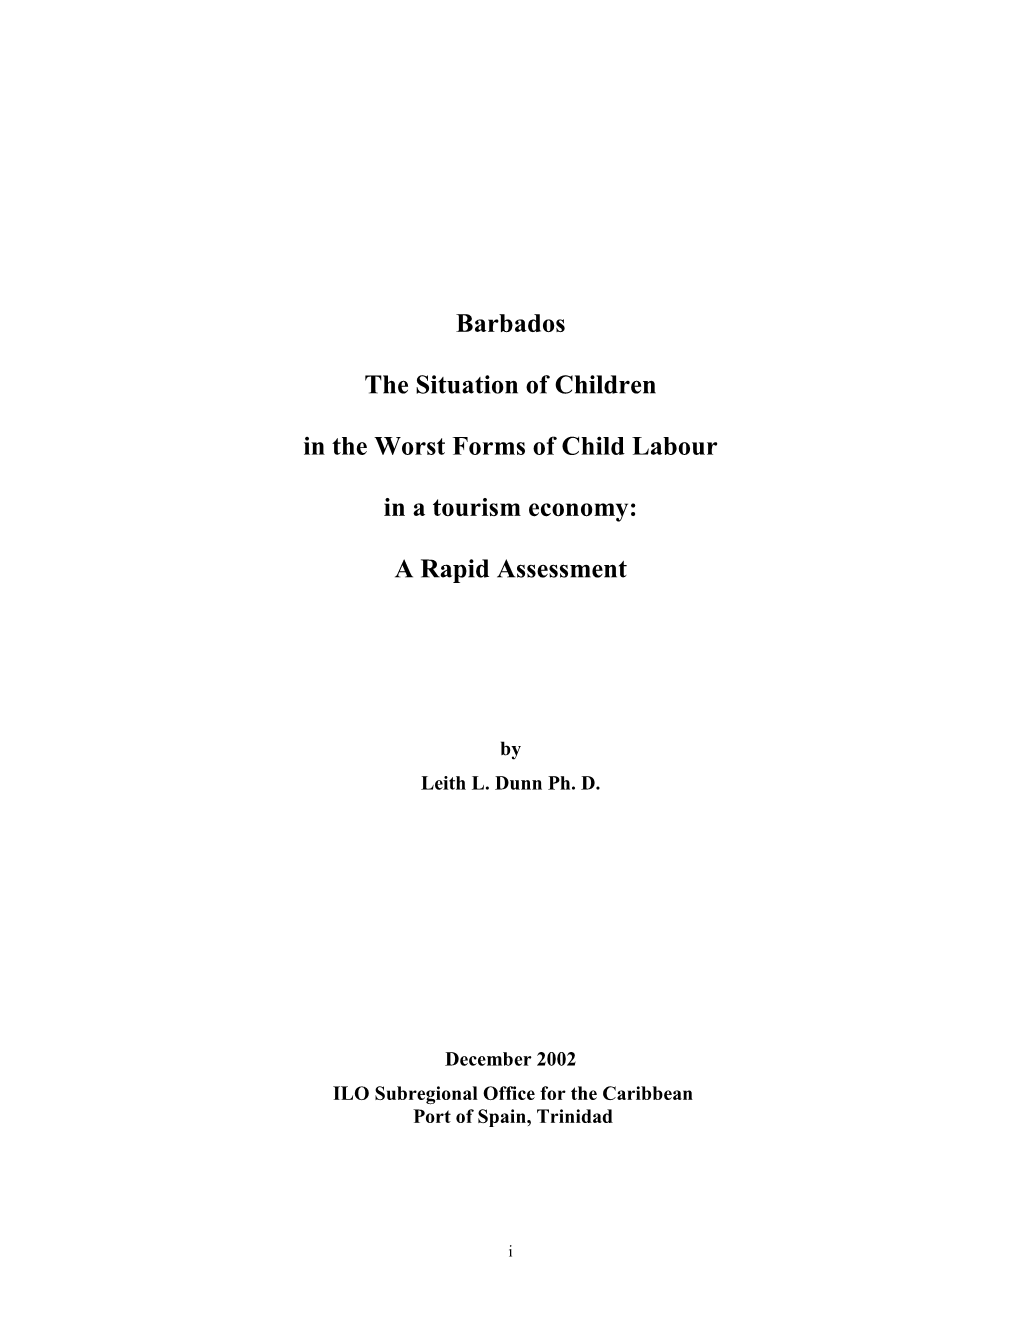 Barbados the Situation of Children in the Worst Forms of Child Labour in a Tourism Economy: a Rapid Assessment Port of Spain, International Labour Office, 2003